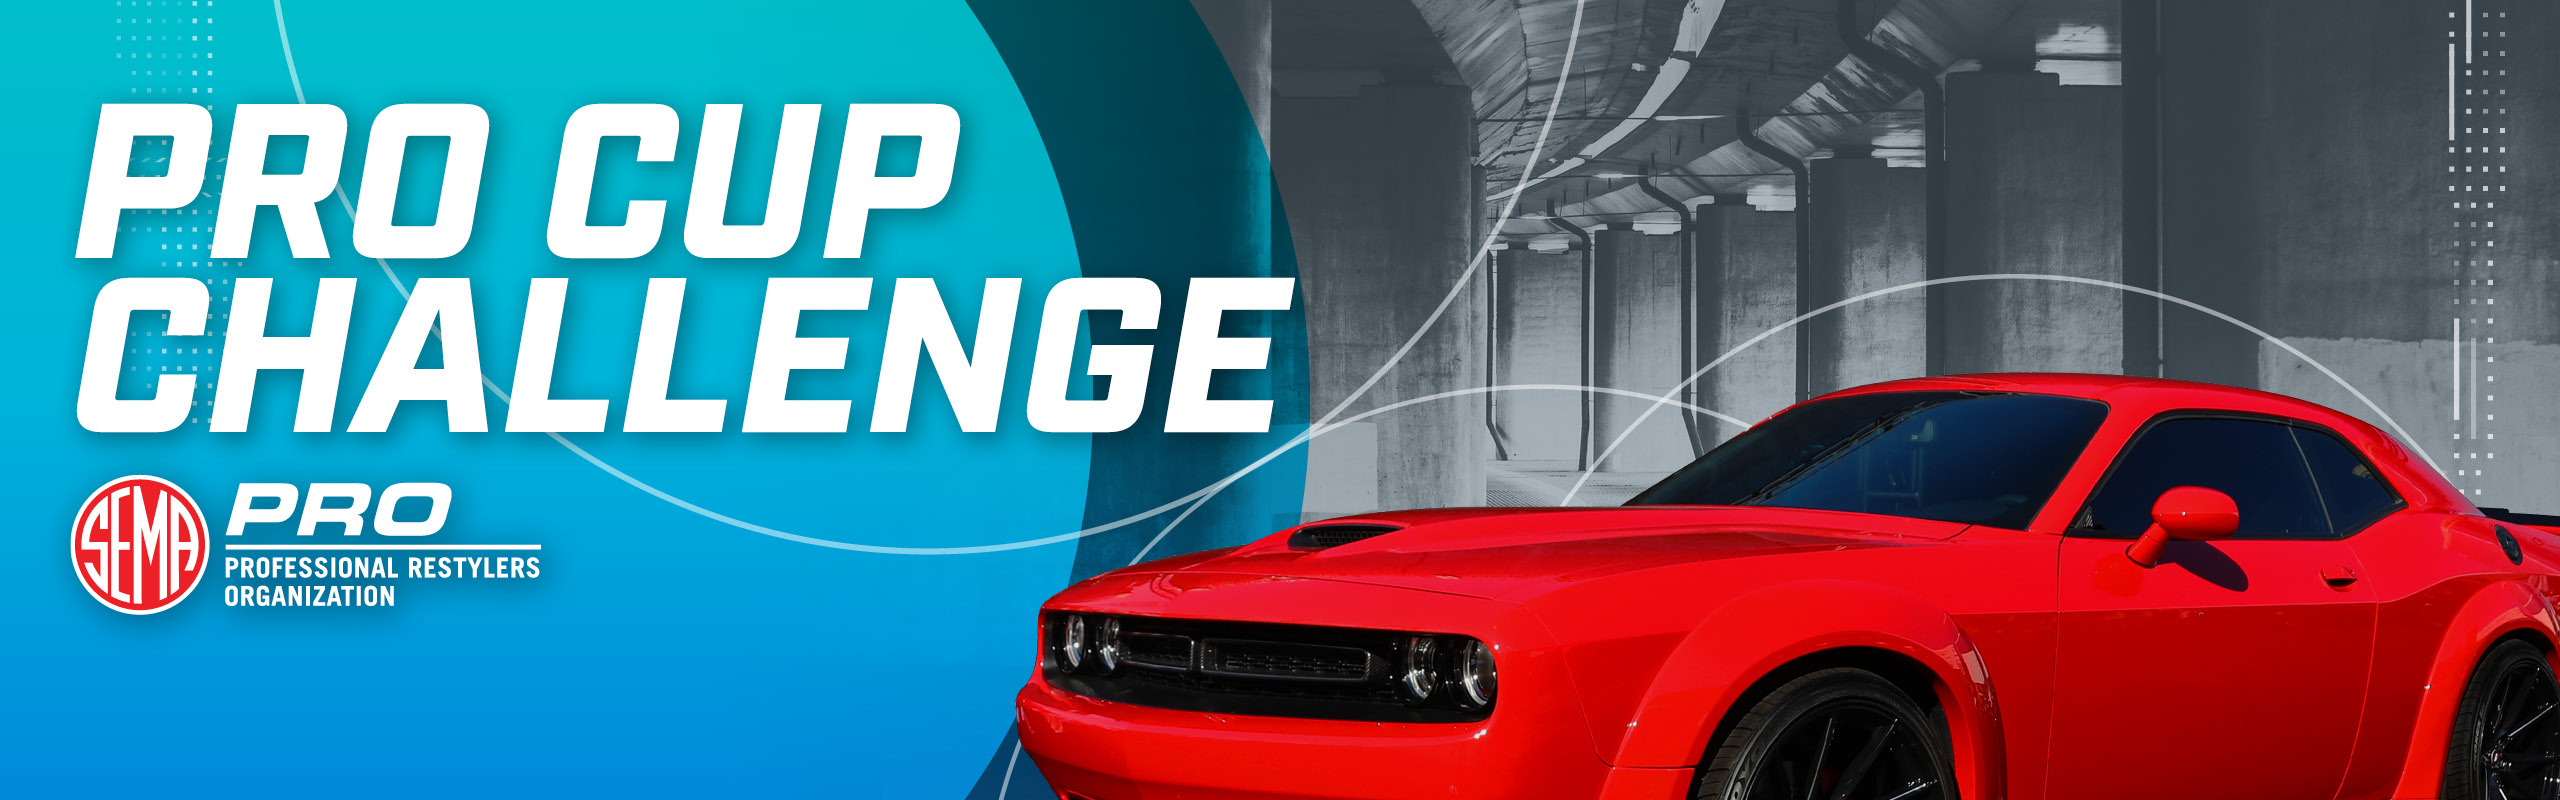 PRO CUP CHALLENGE - muscle car and the PRO Logo